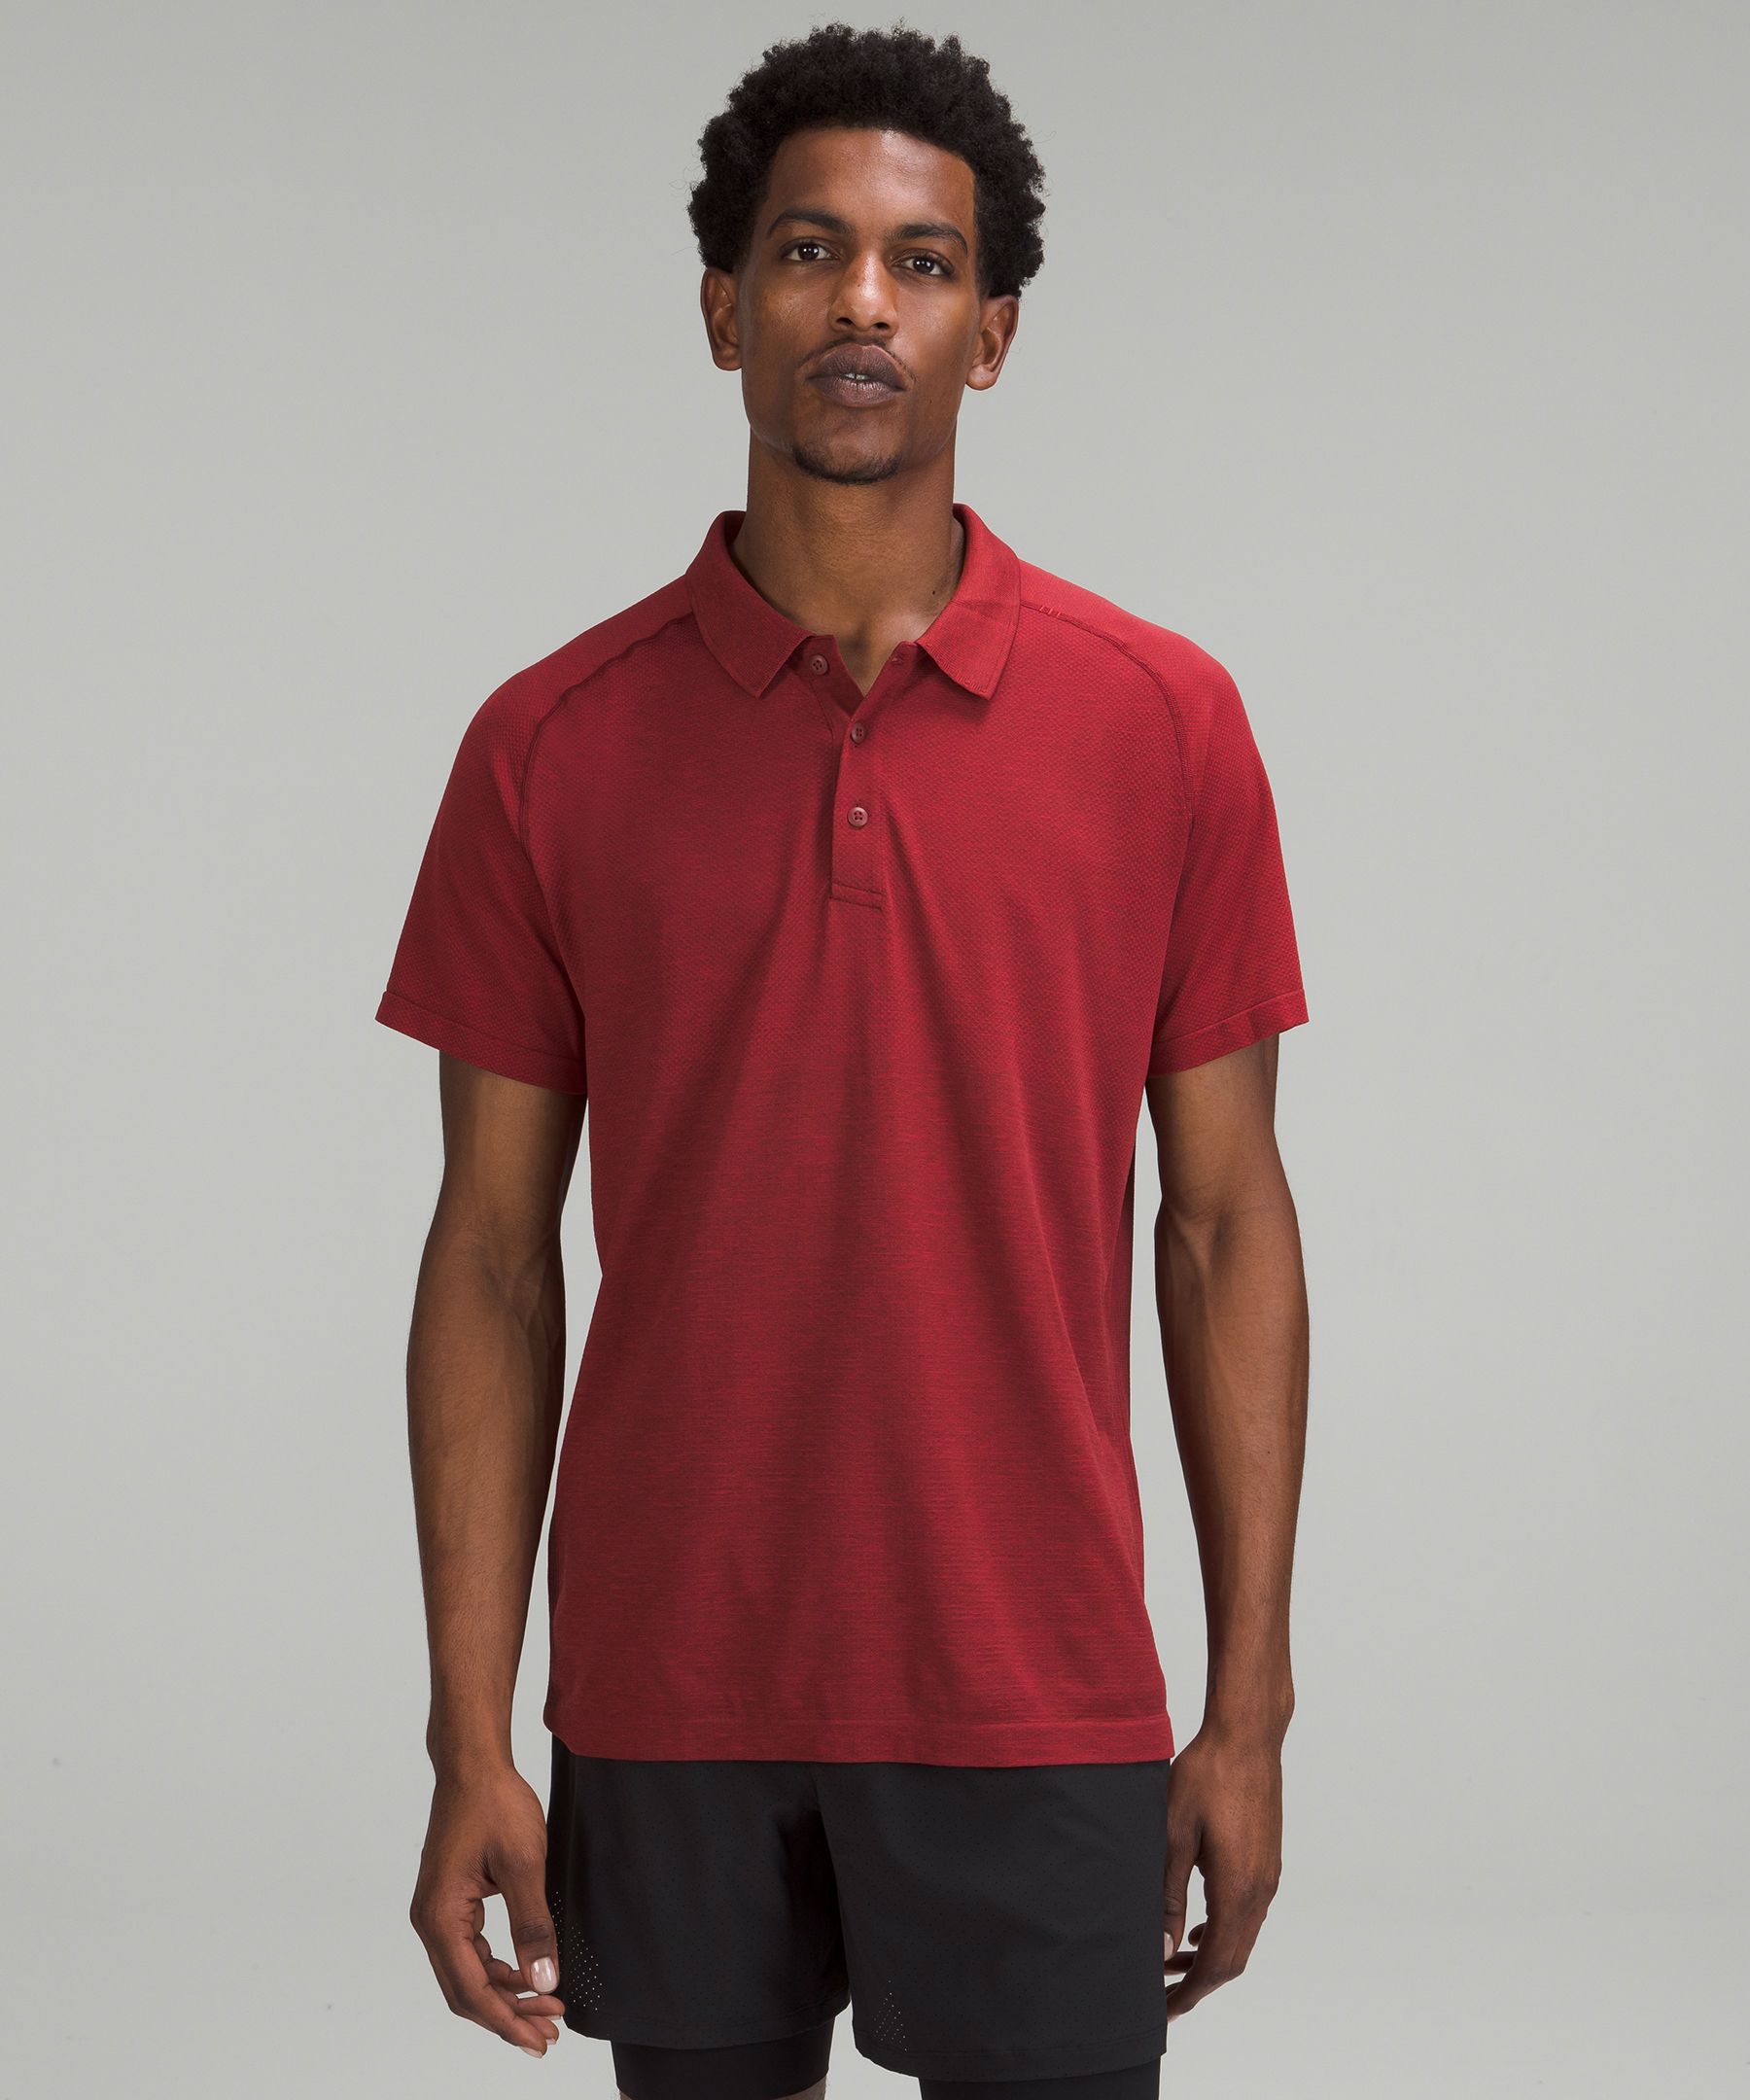 Lululemon Metal Vent Tech Polo 2.0 In Red